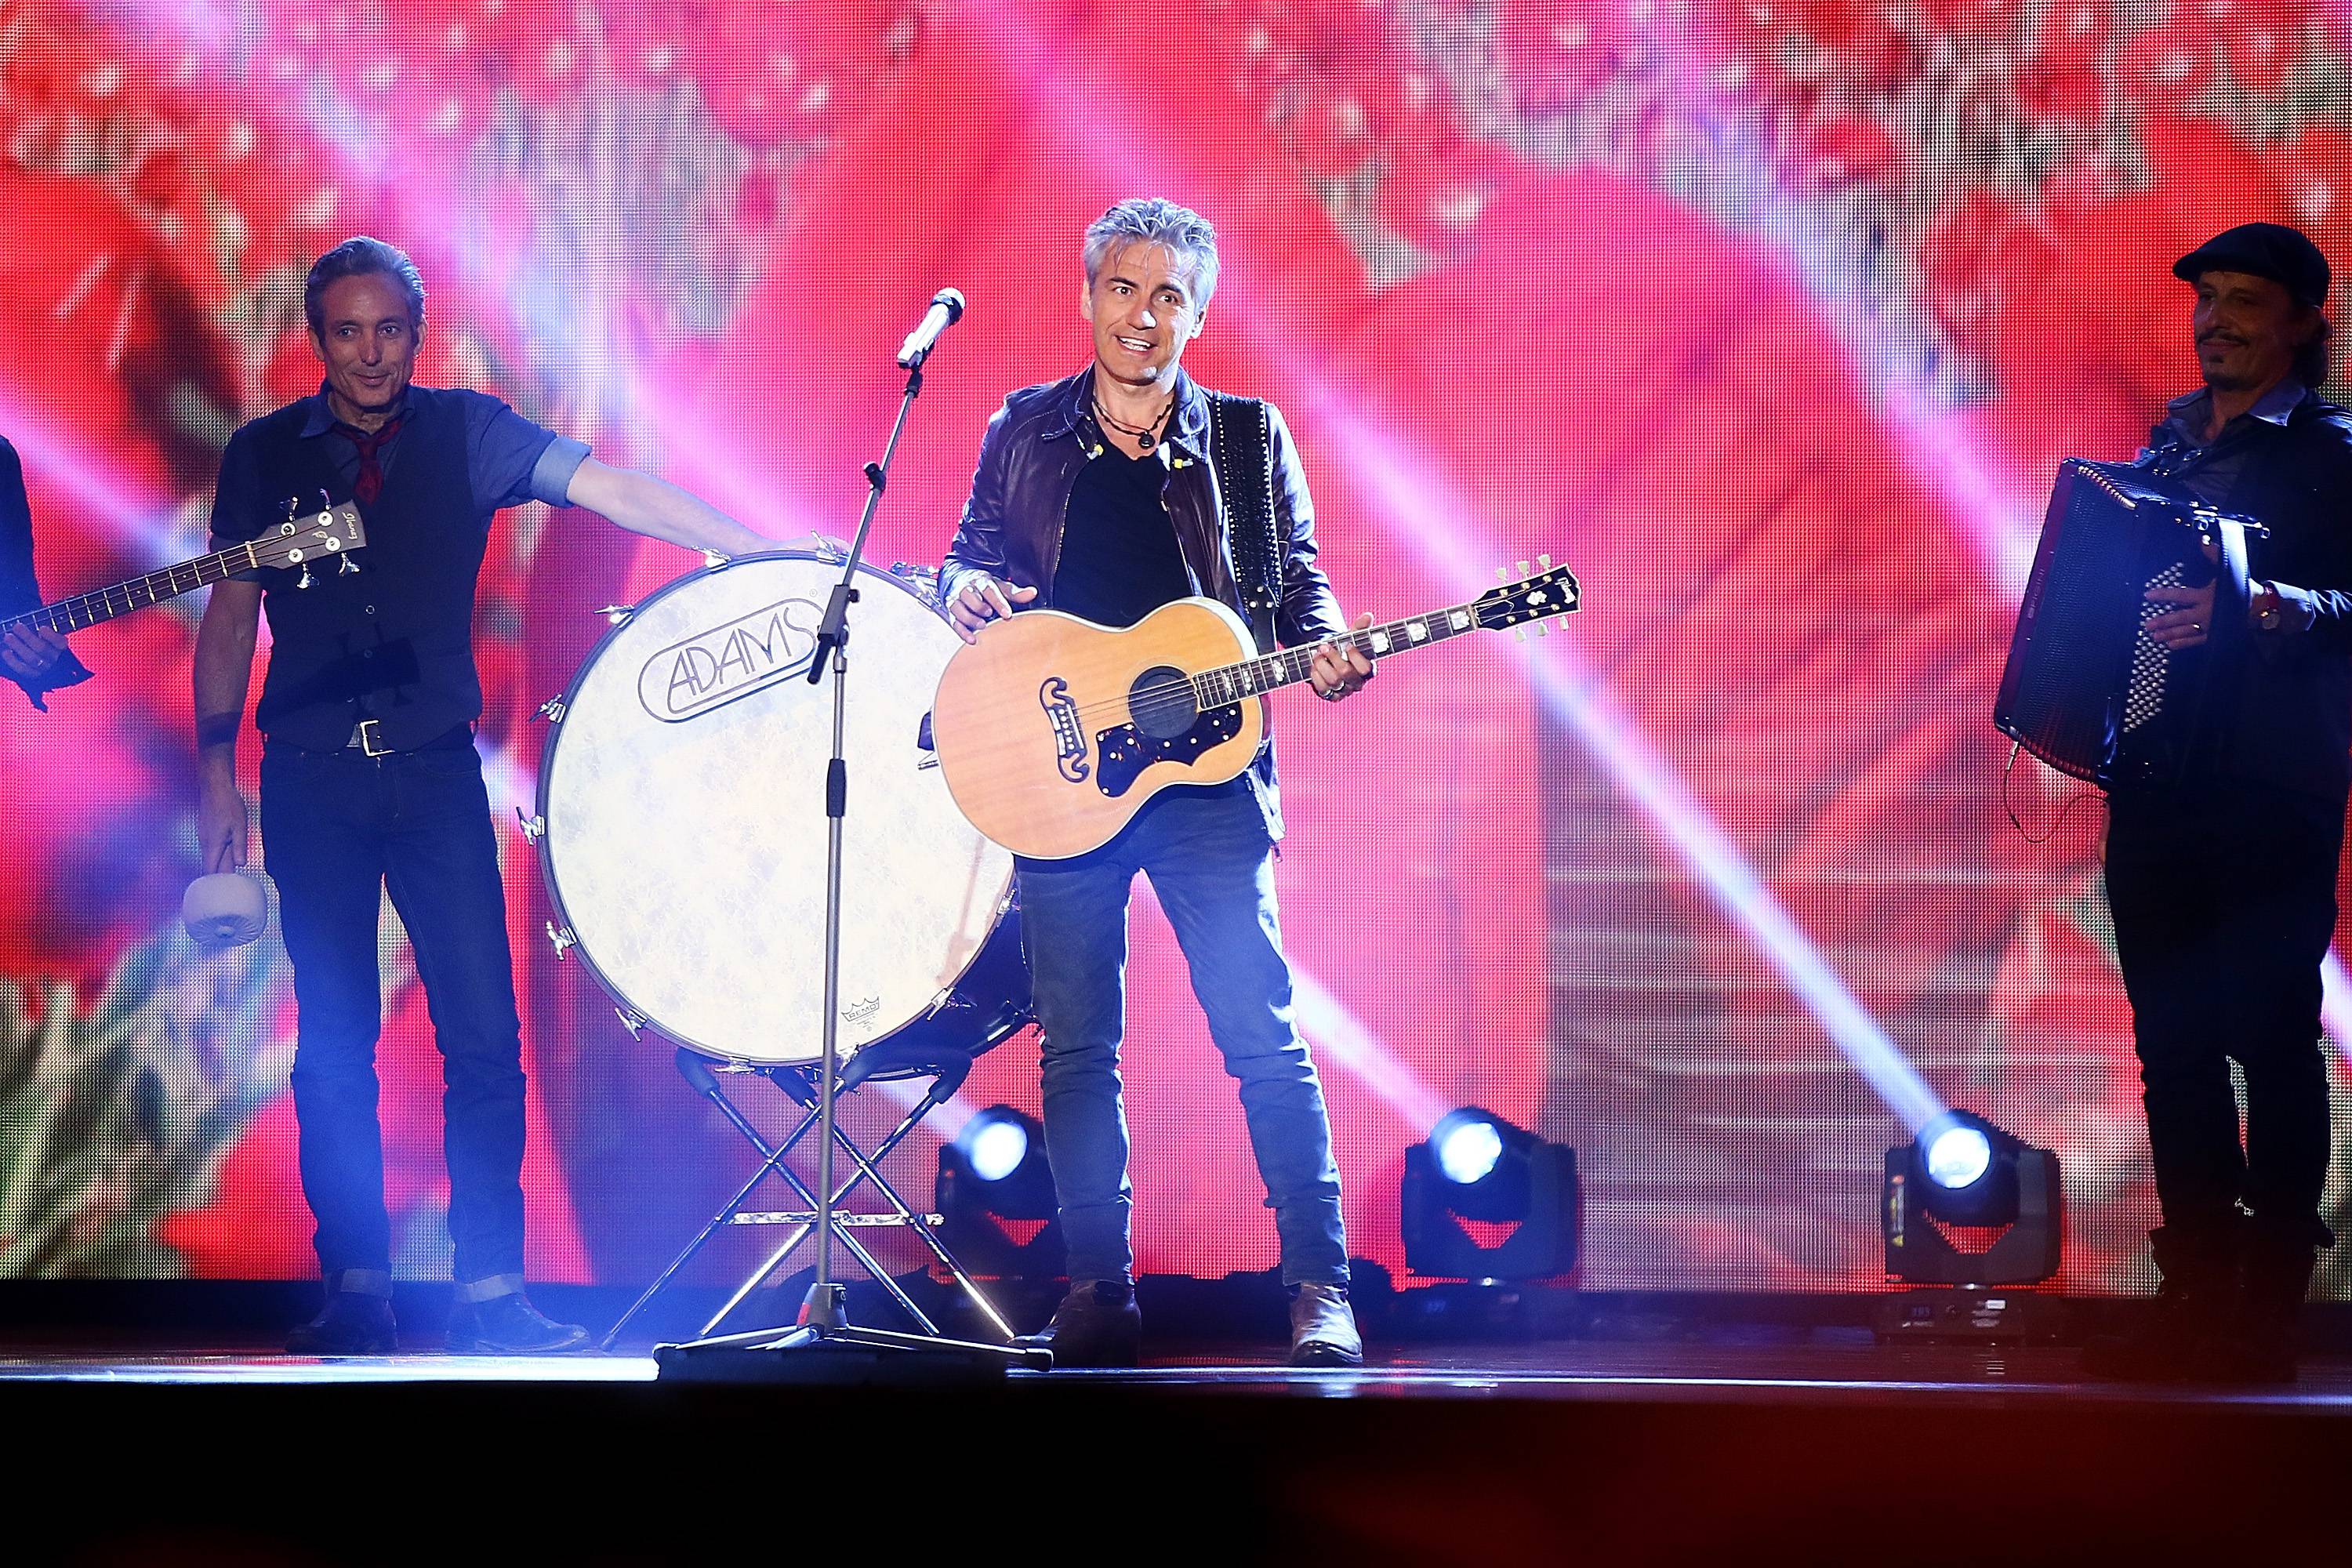 ROME, ITALY - APRIL 25:  Luciano Ligabue performs during the 'Viva il 25 aprile!' at Piazza del Quirinale on April 25, 2015 in Rome, Italy.  (Photo by Ernesto Ruscio/Getty Images)